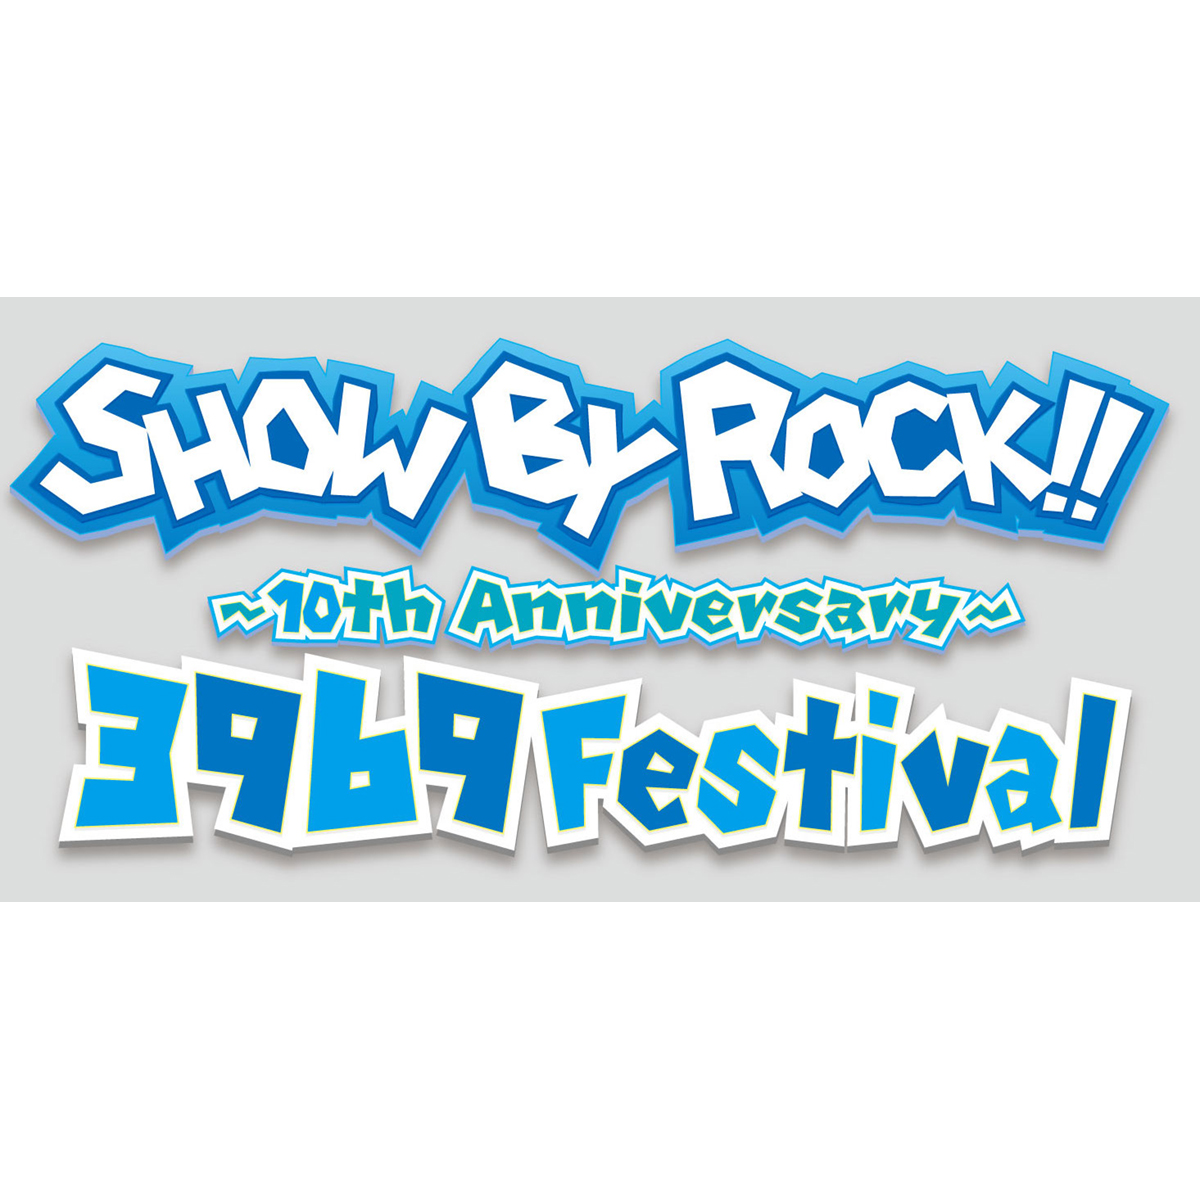 『SHOW BY ROCK!!』2022年6月5日（日）「SHOW BY ROCK!! 3969 Festival～10th Anniversary～」開催決定！第一弾出演者も公開！ - 画像一覧（2/2）